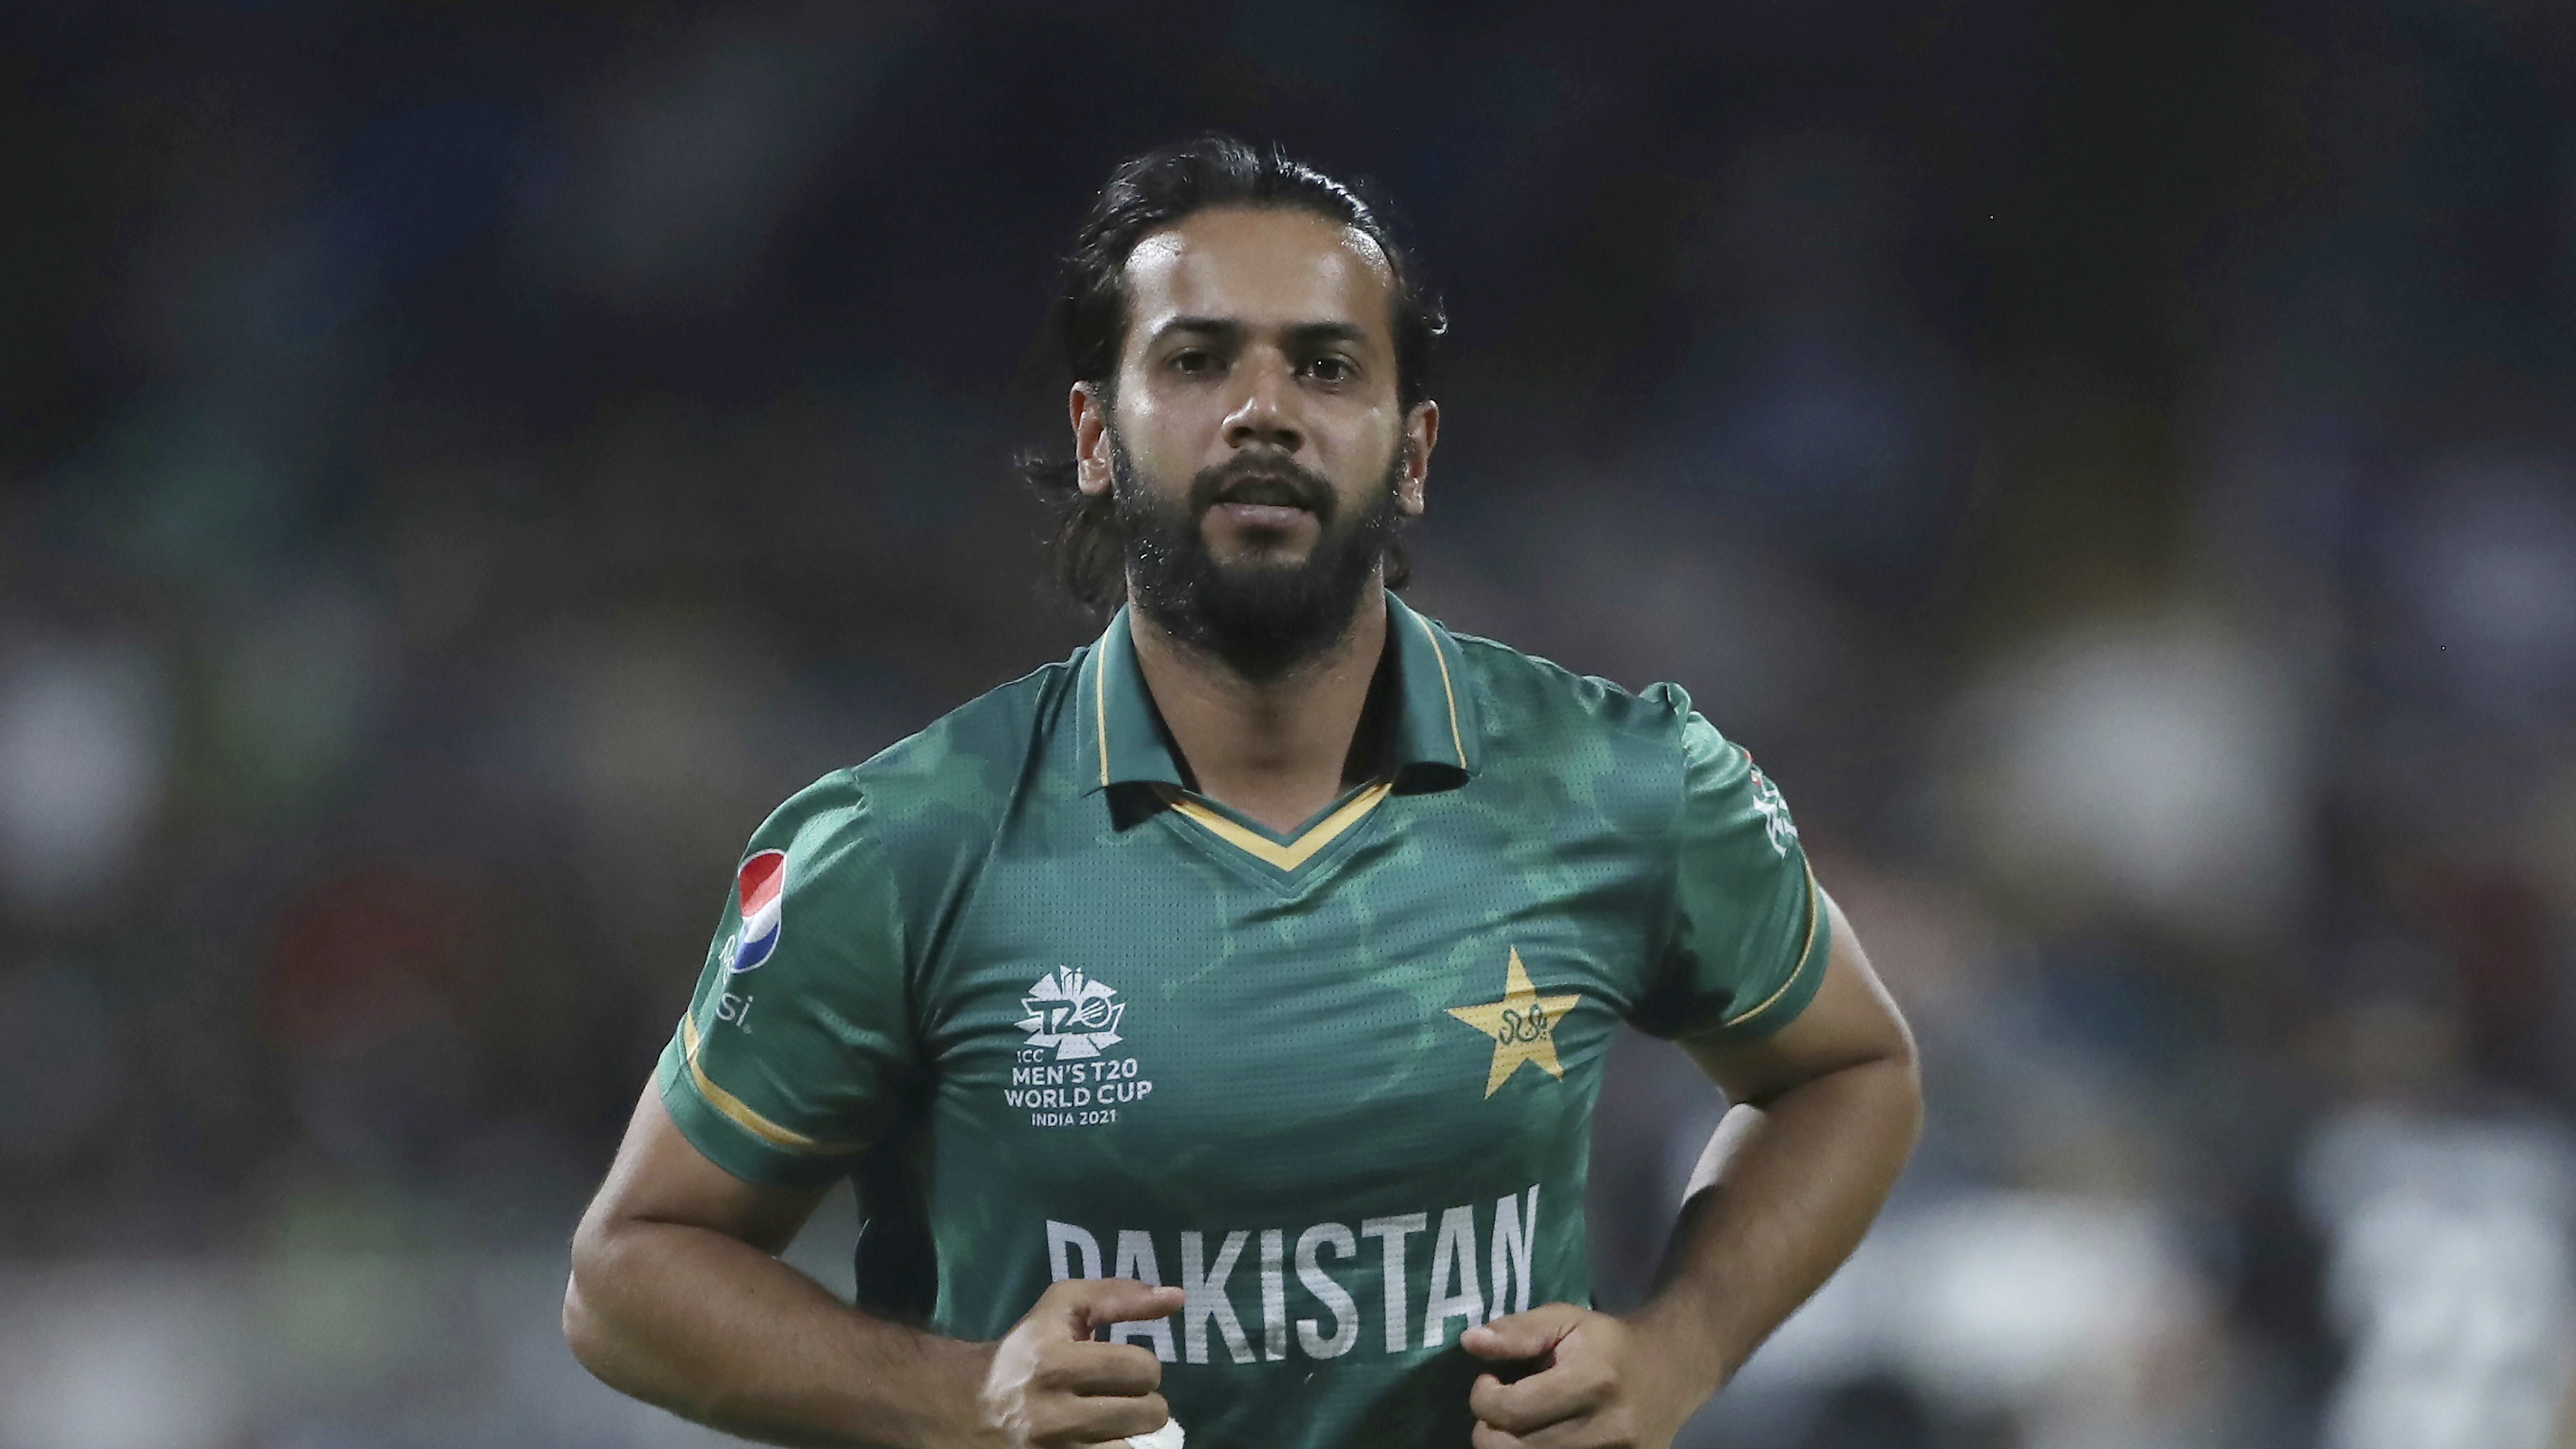 Imad Wasim ends retirement to participate in ICC T20 World Cup as Pakistan cricketer | Cricket News